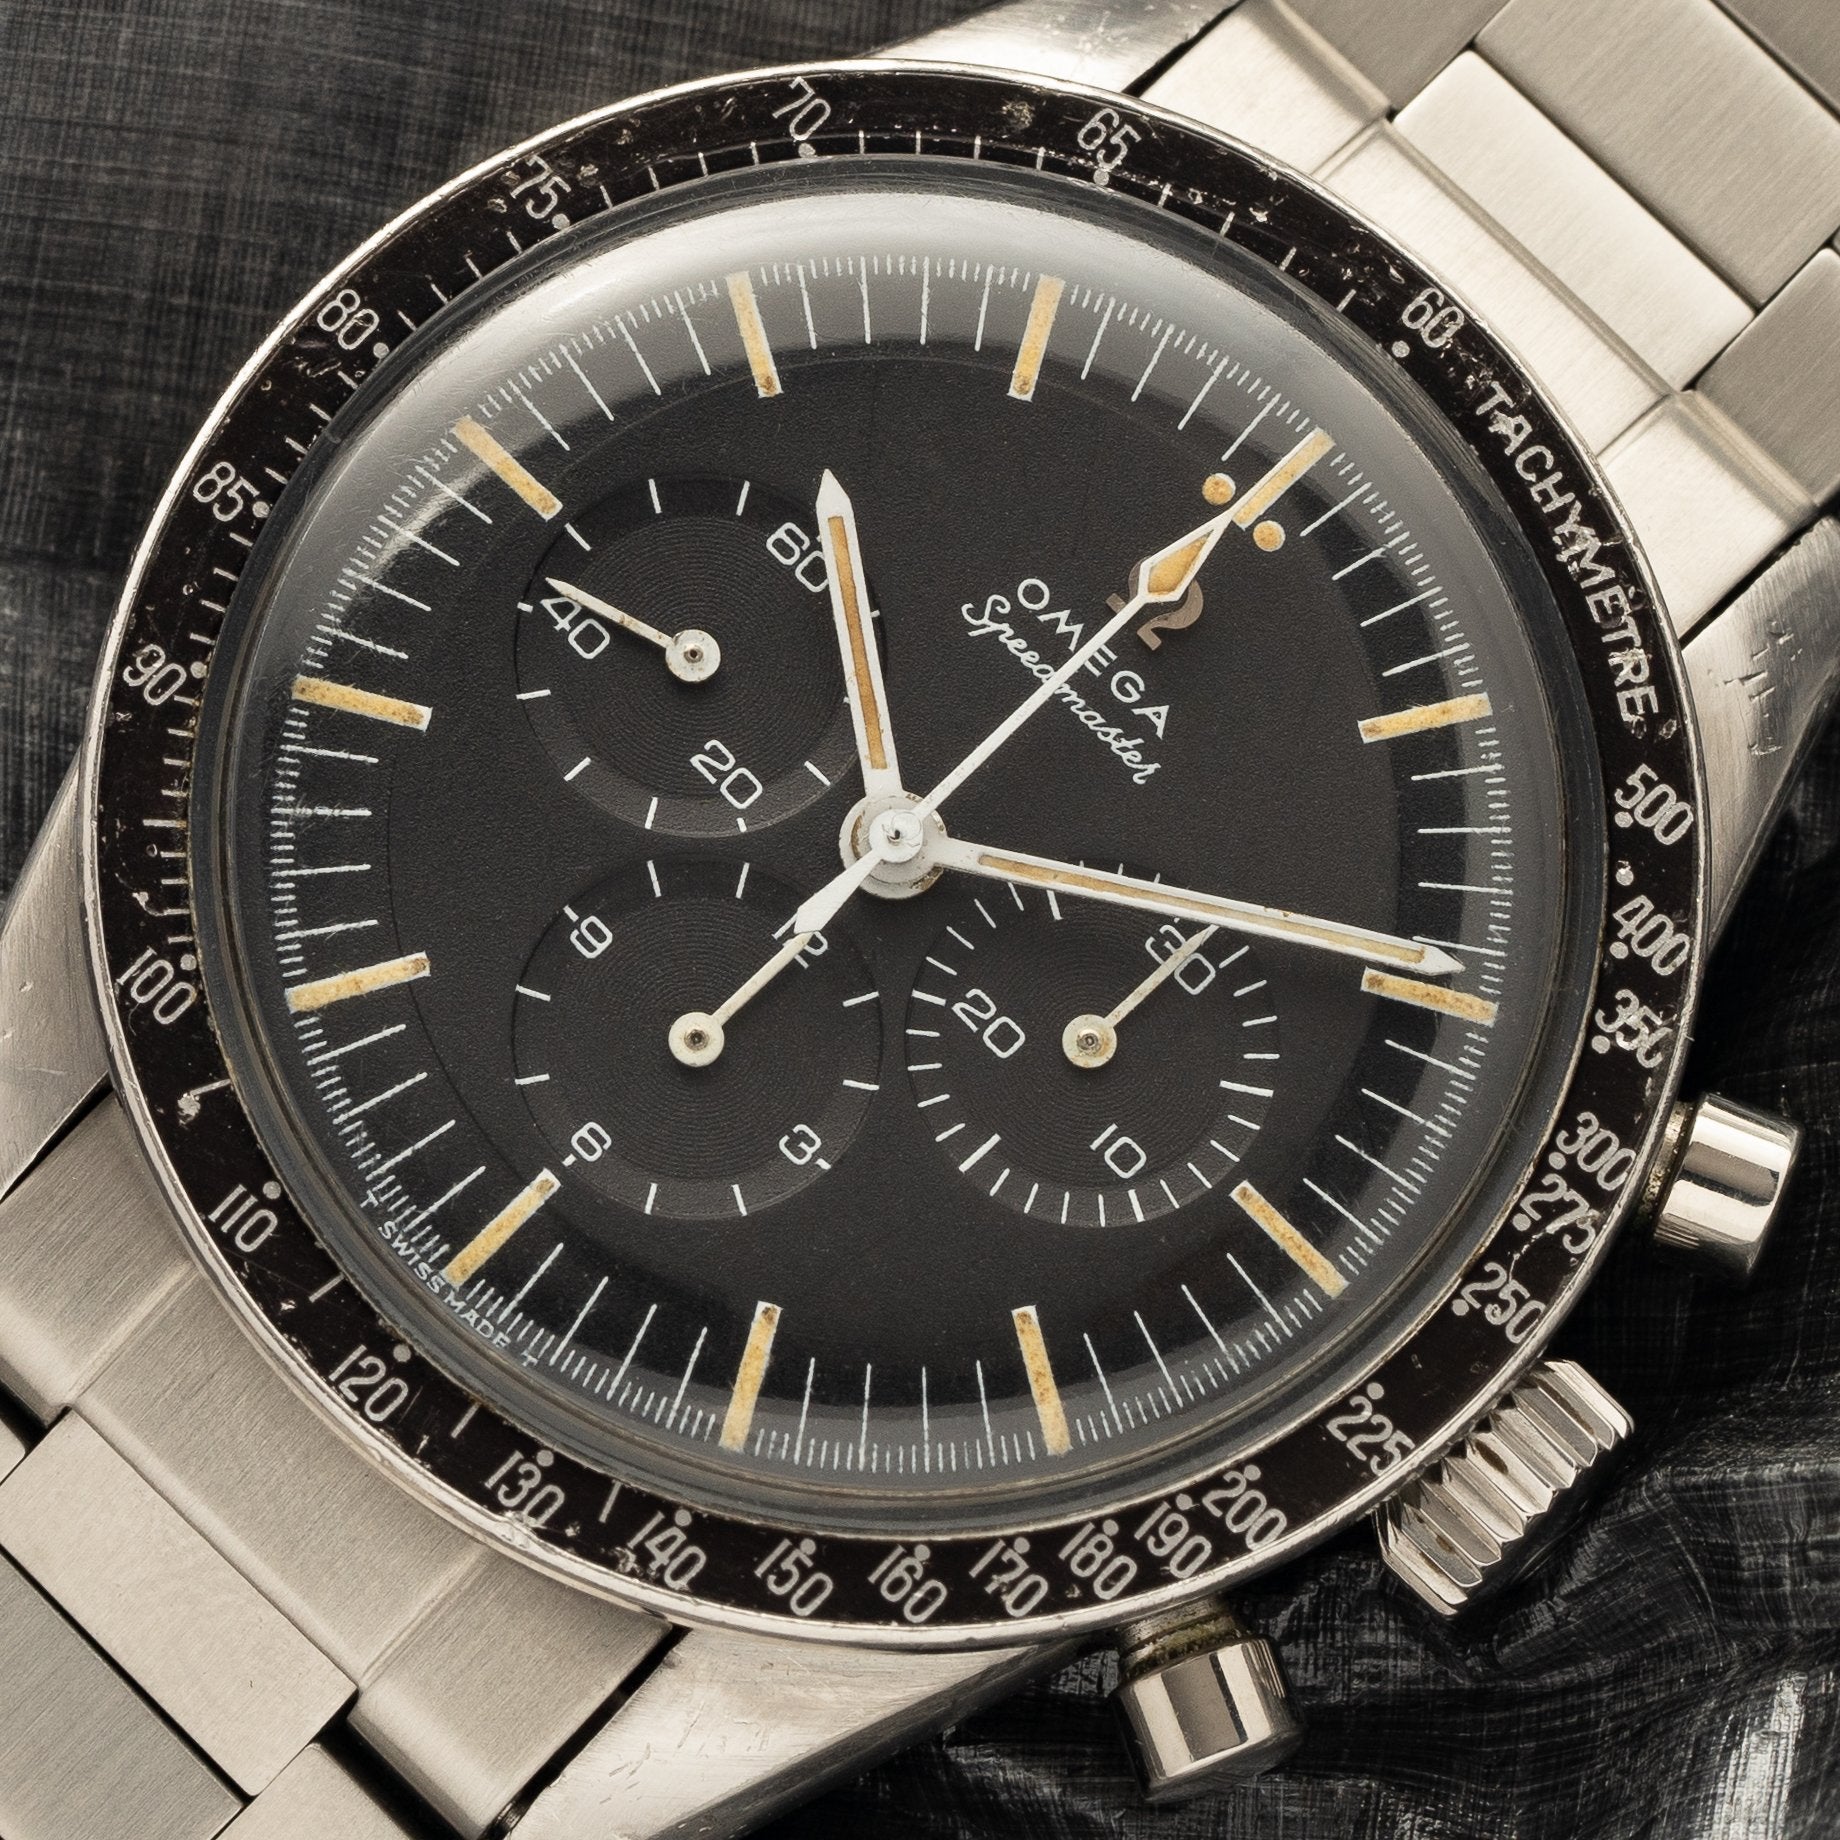 Omega Speedmaster ST 105.003  "Ed White" w/Archive Papers - 1969